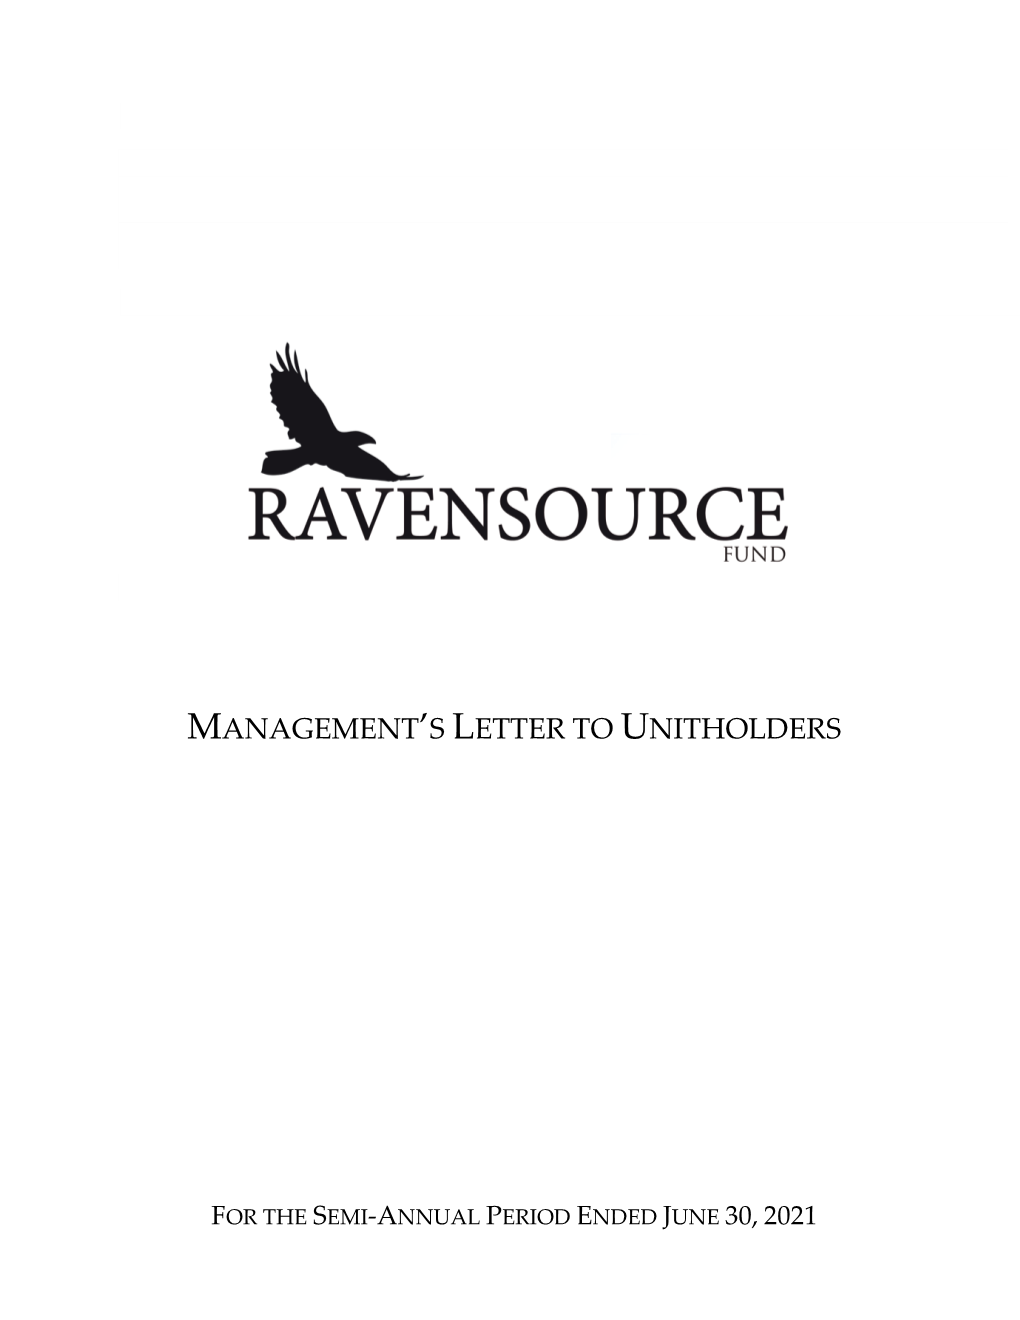 Ravensource Fund the Ravensource Fund Is a Closed-End Investment Trust Whose Units Trade on the TSX Under the Symbol RAV.UN